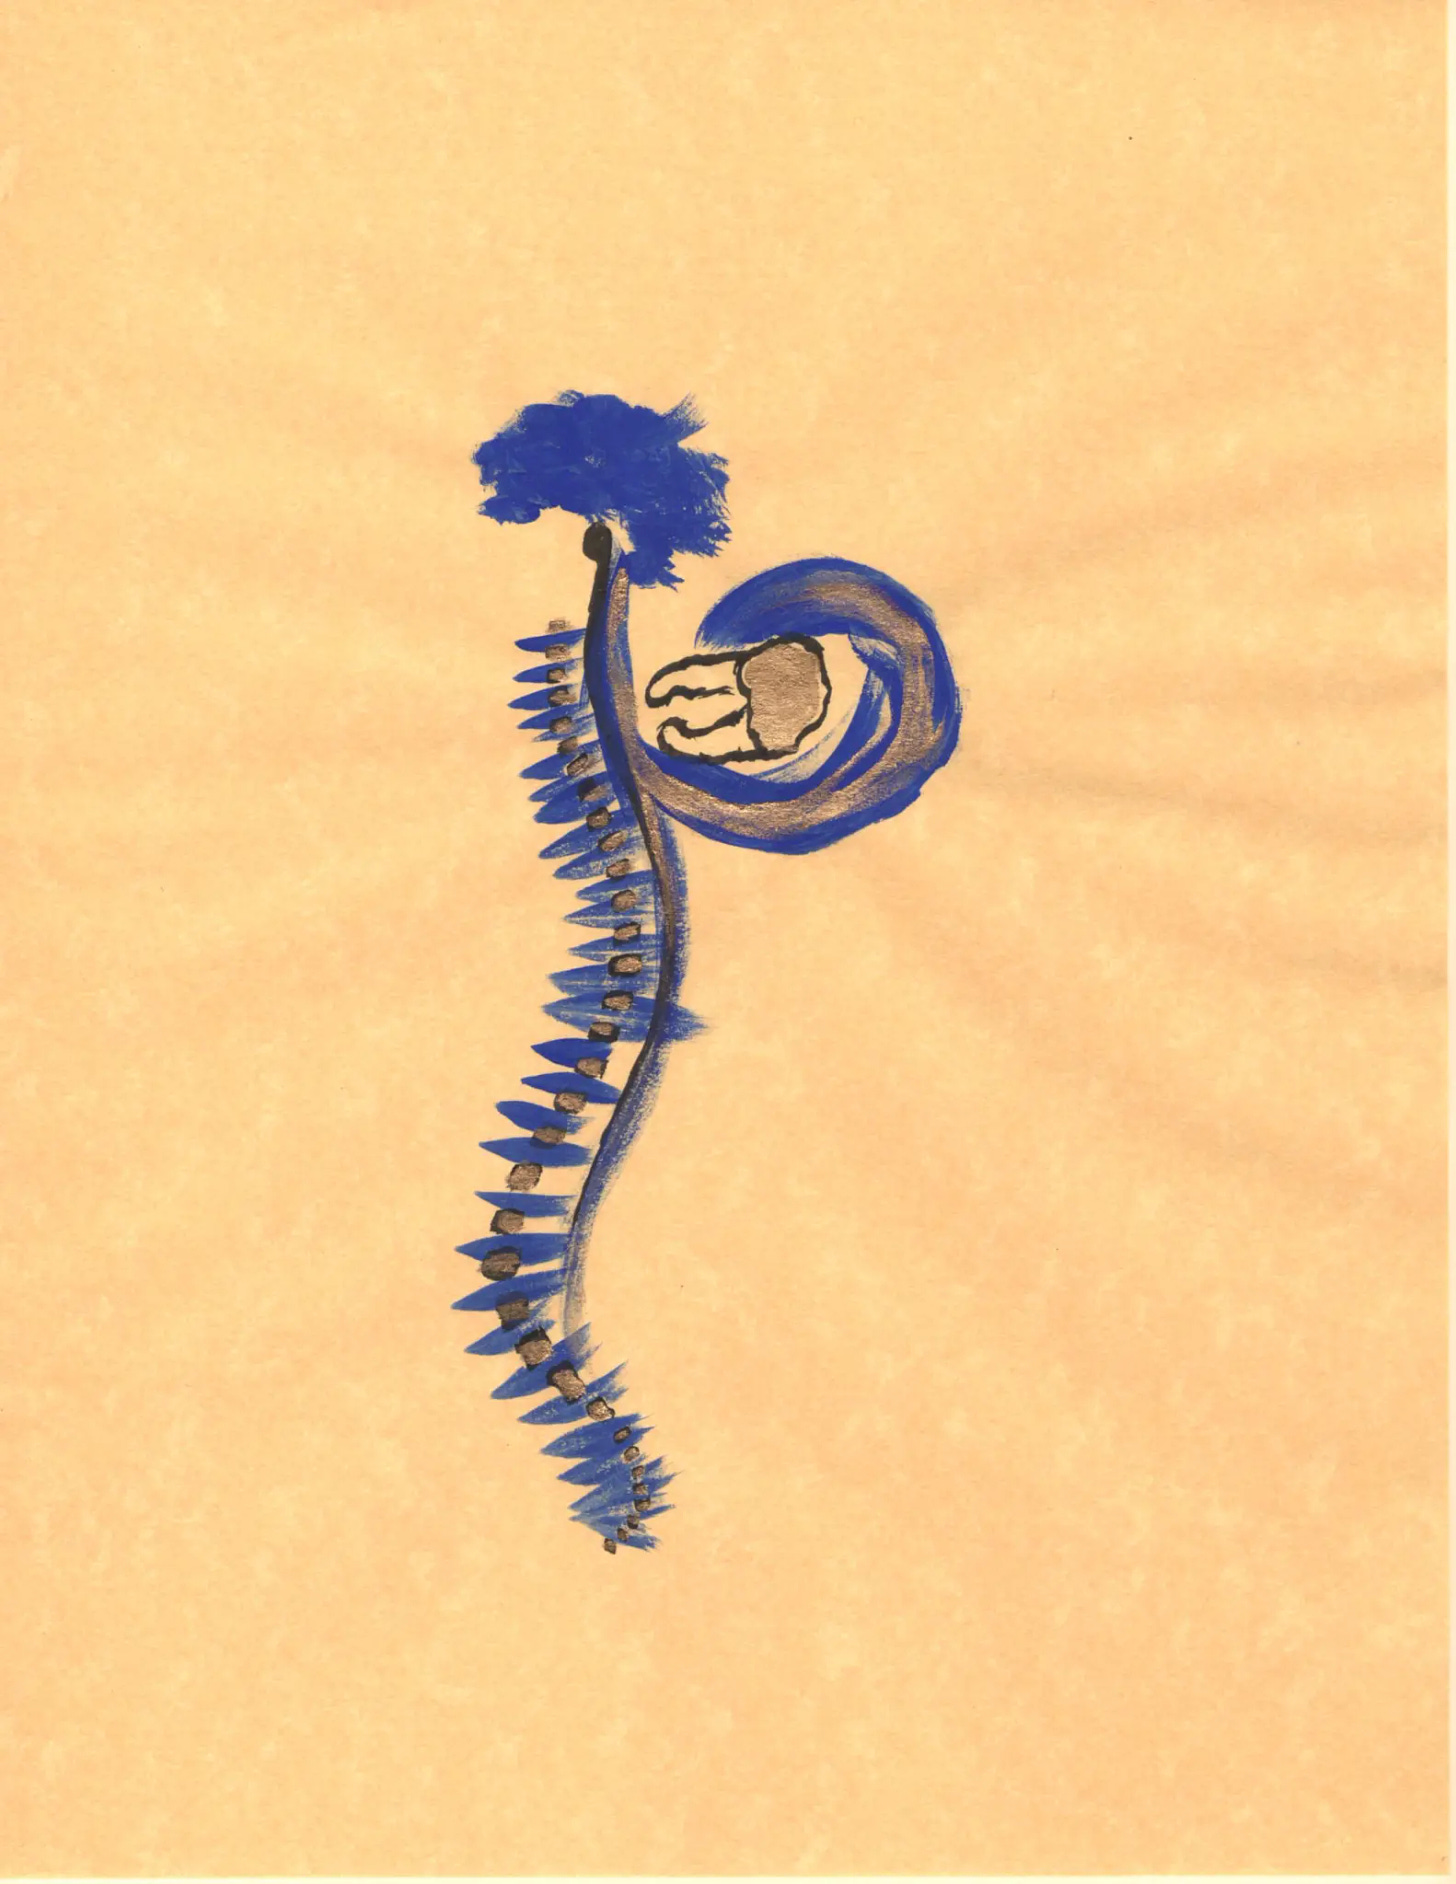 drawing of a spinal cord, vertebrae & brain with a tidal wave leaking from the back of the cervical spine and washing back toward the body, a gold-capped molar caught up in the wave; the spinal cord is drawn in black with gold illumination, the vertebrate in black with gold illumination over them, and the nerves, brain, and wave in ultramarine blue.